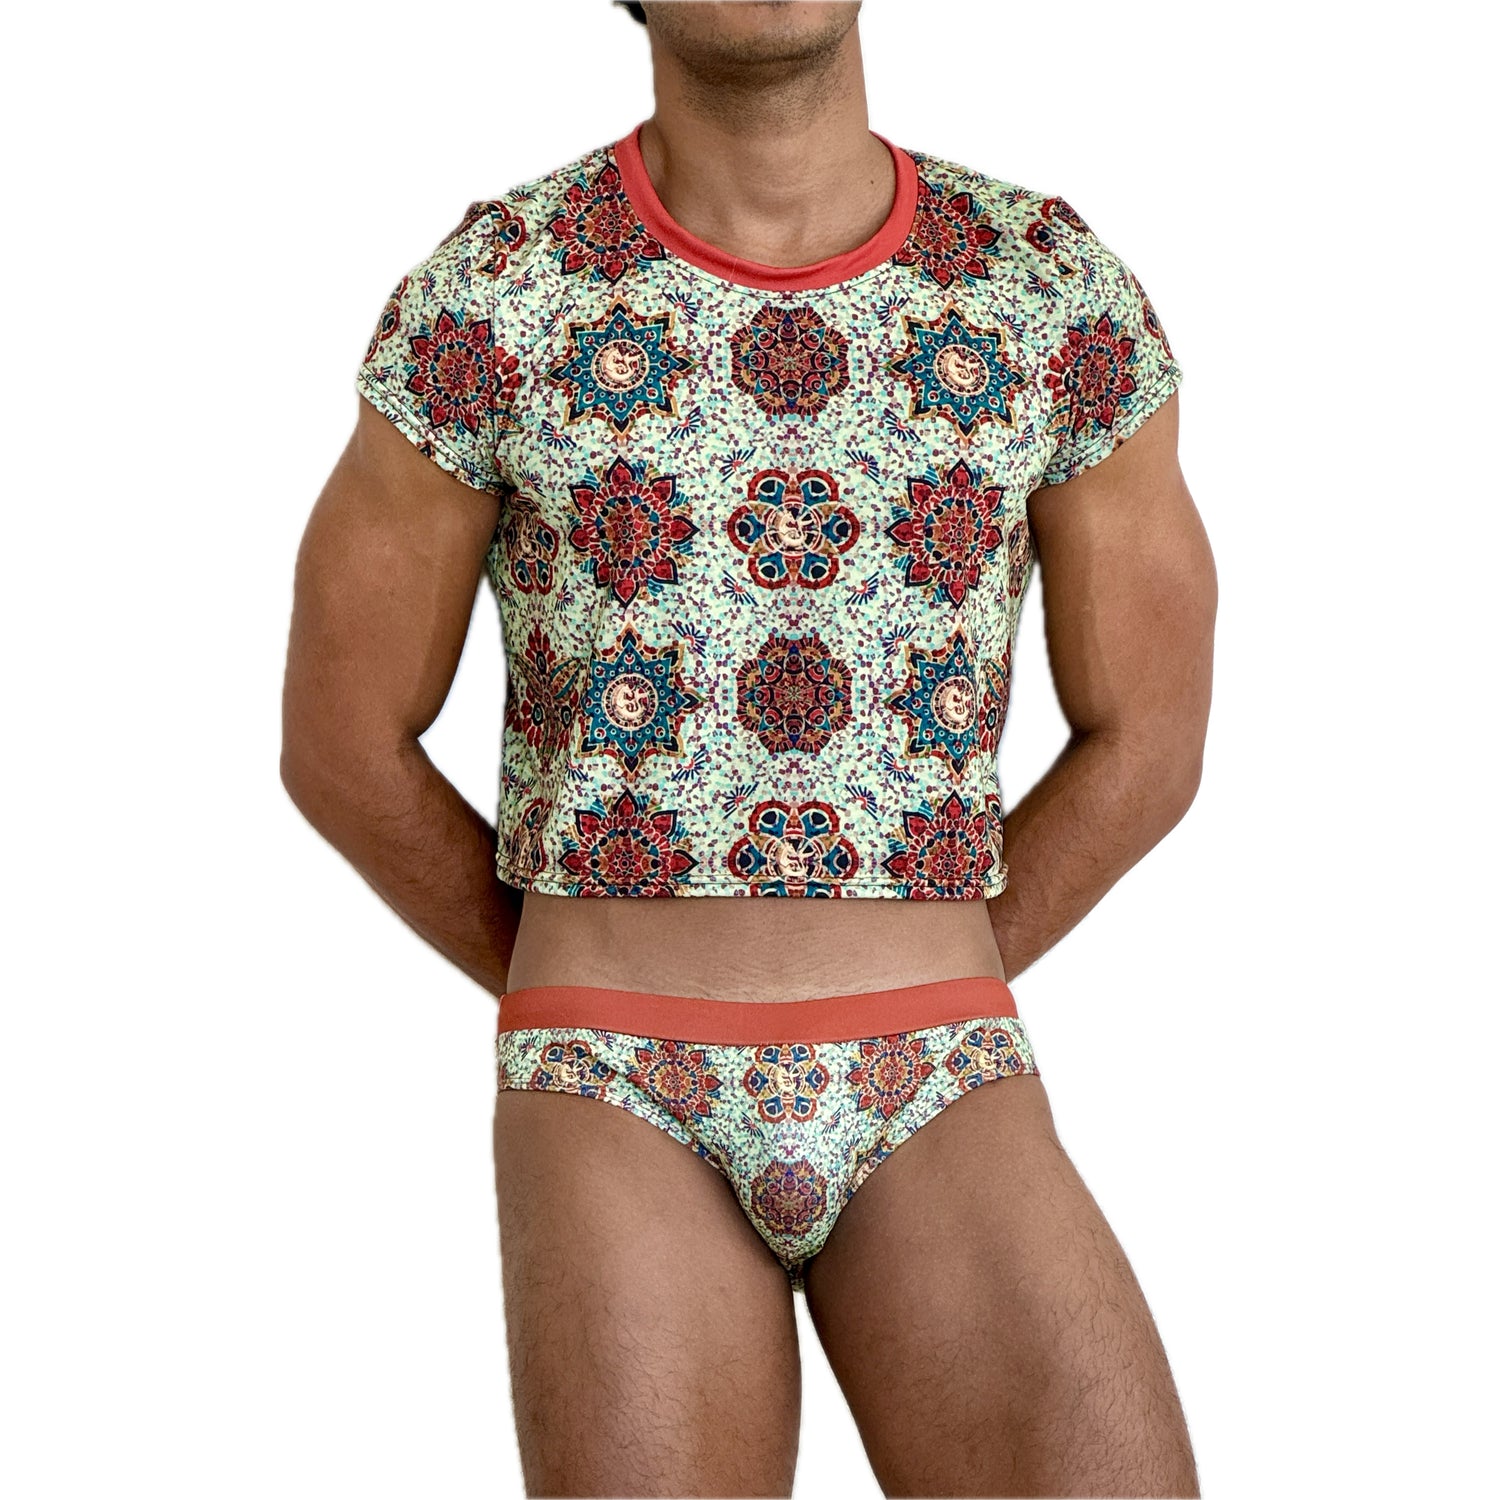 Mosaic Men's Swim Outfit Collection